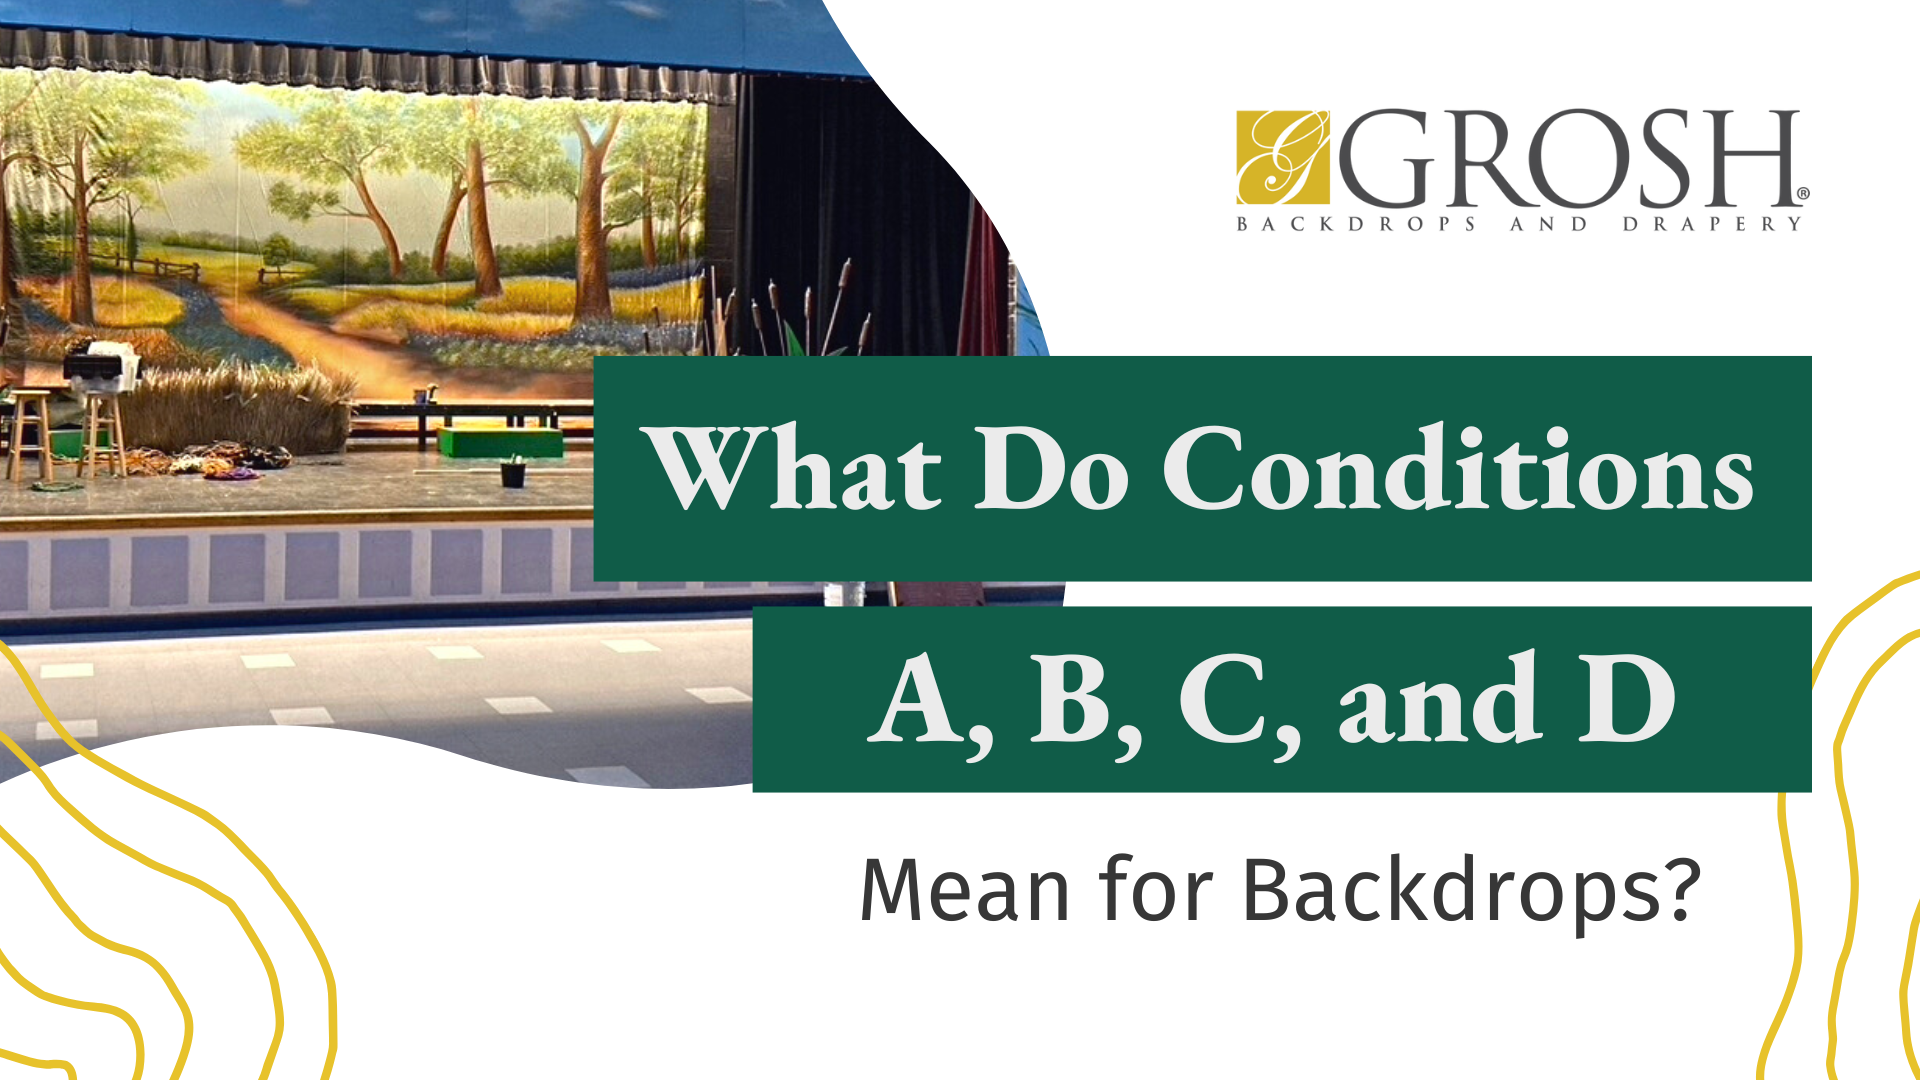 What Do Conditions A, B, C, and D Mean for Backdrops Featured image